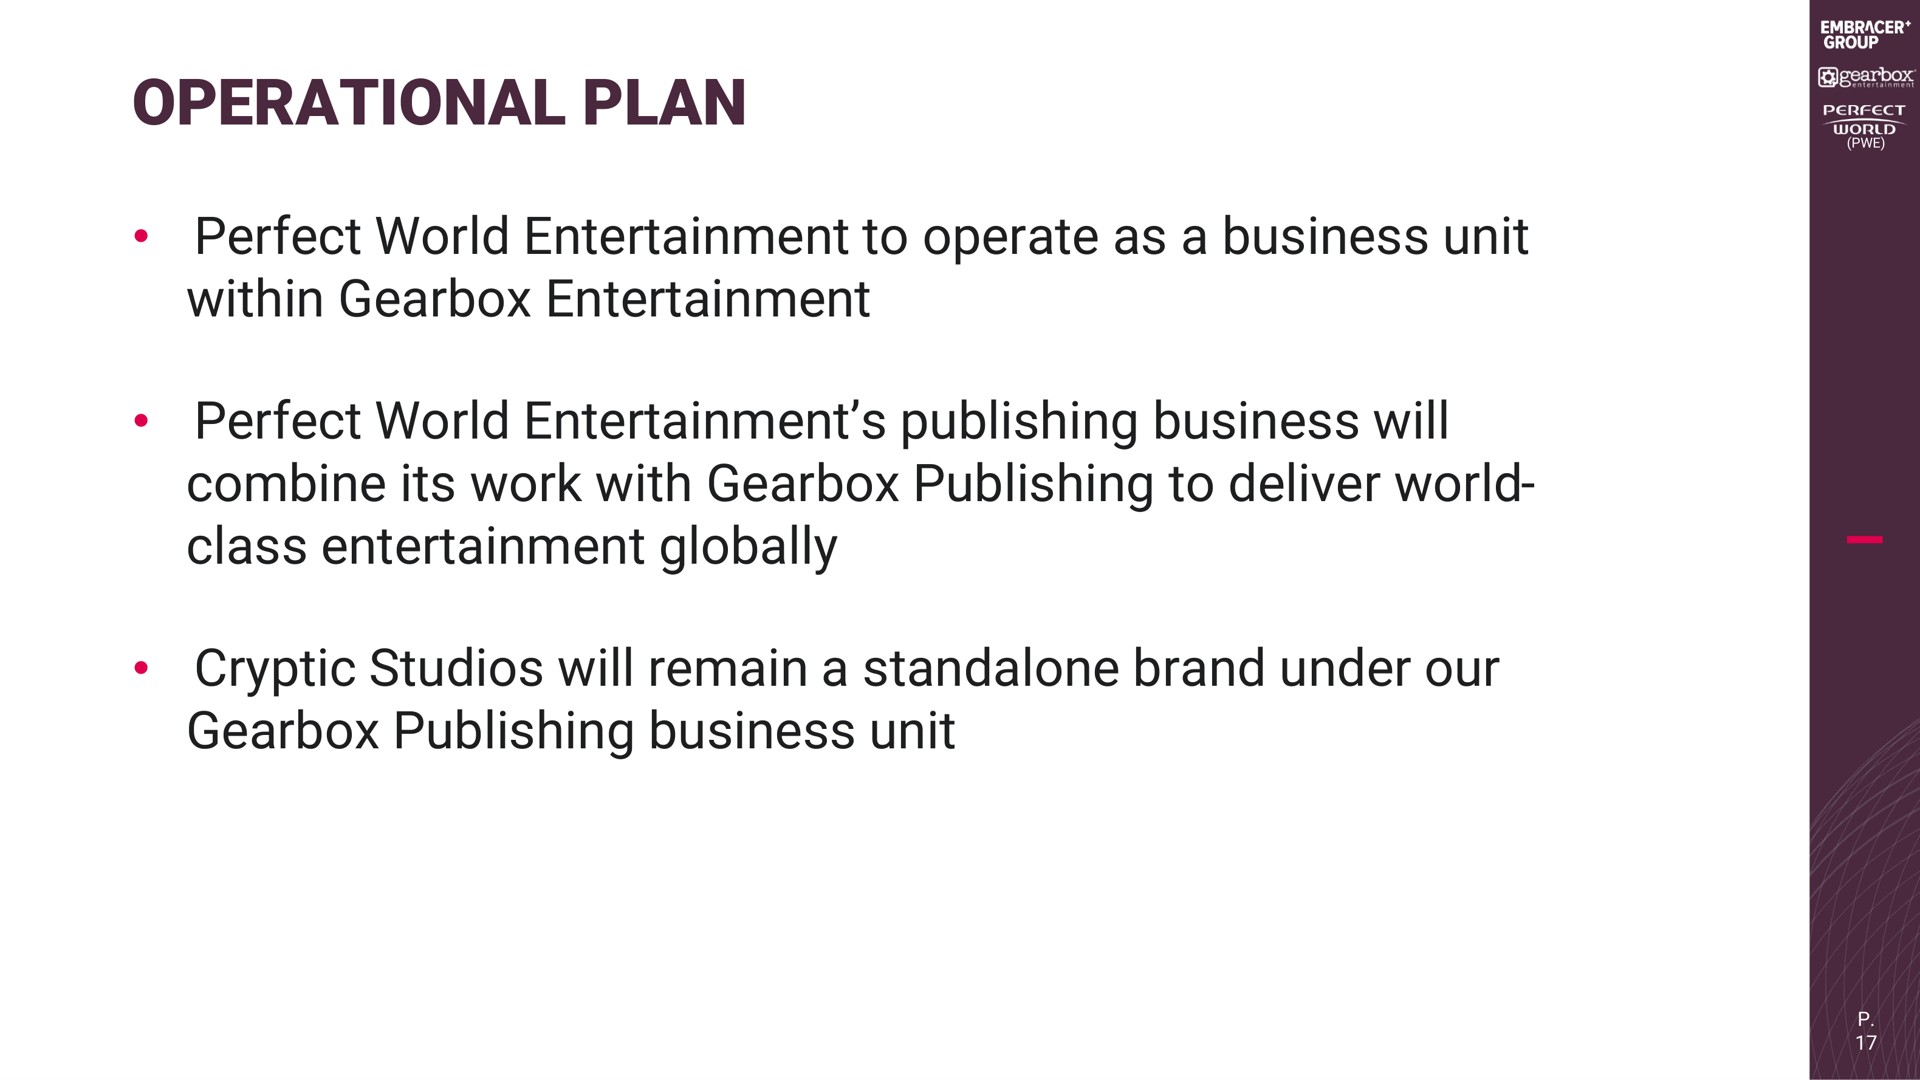 operational plan perfect world entertainment to operate as a business unit within gearbox entertainment perfect world entertainment publishing business will combine its work with gearbox publishing to deliver world class entertainment globally cryptic studios will remain a brand under our gearbox publishing business unit | Embracer Group